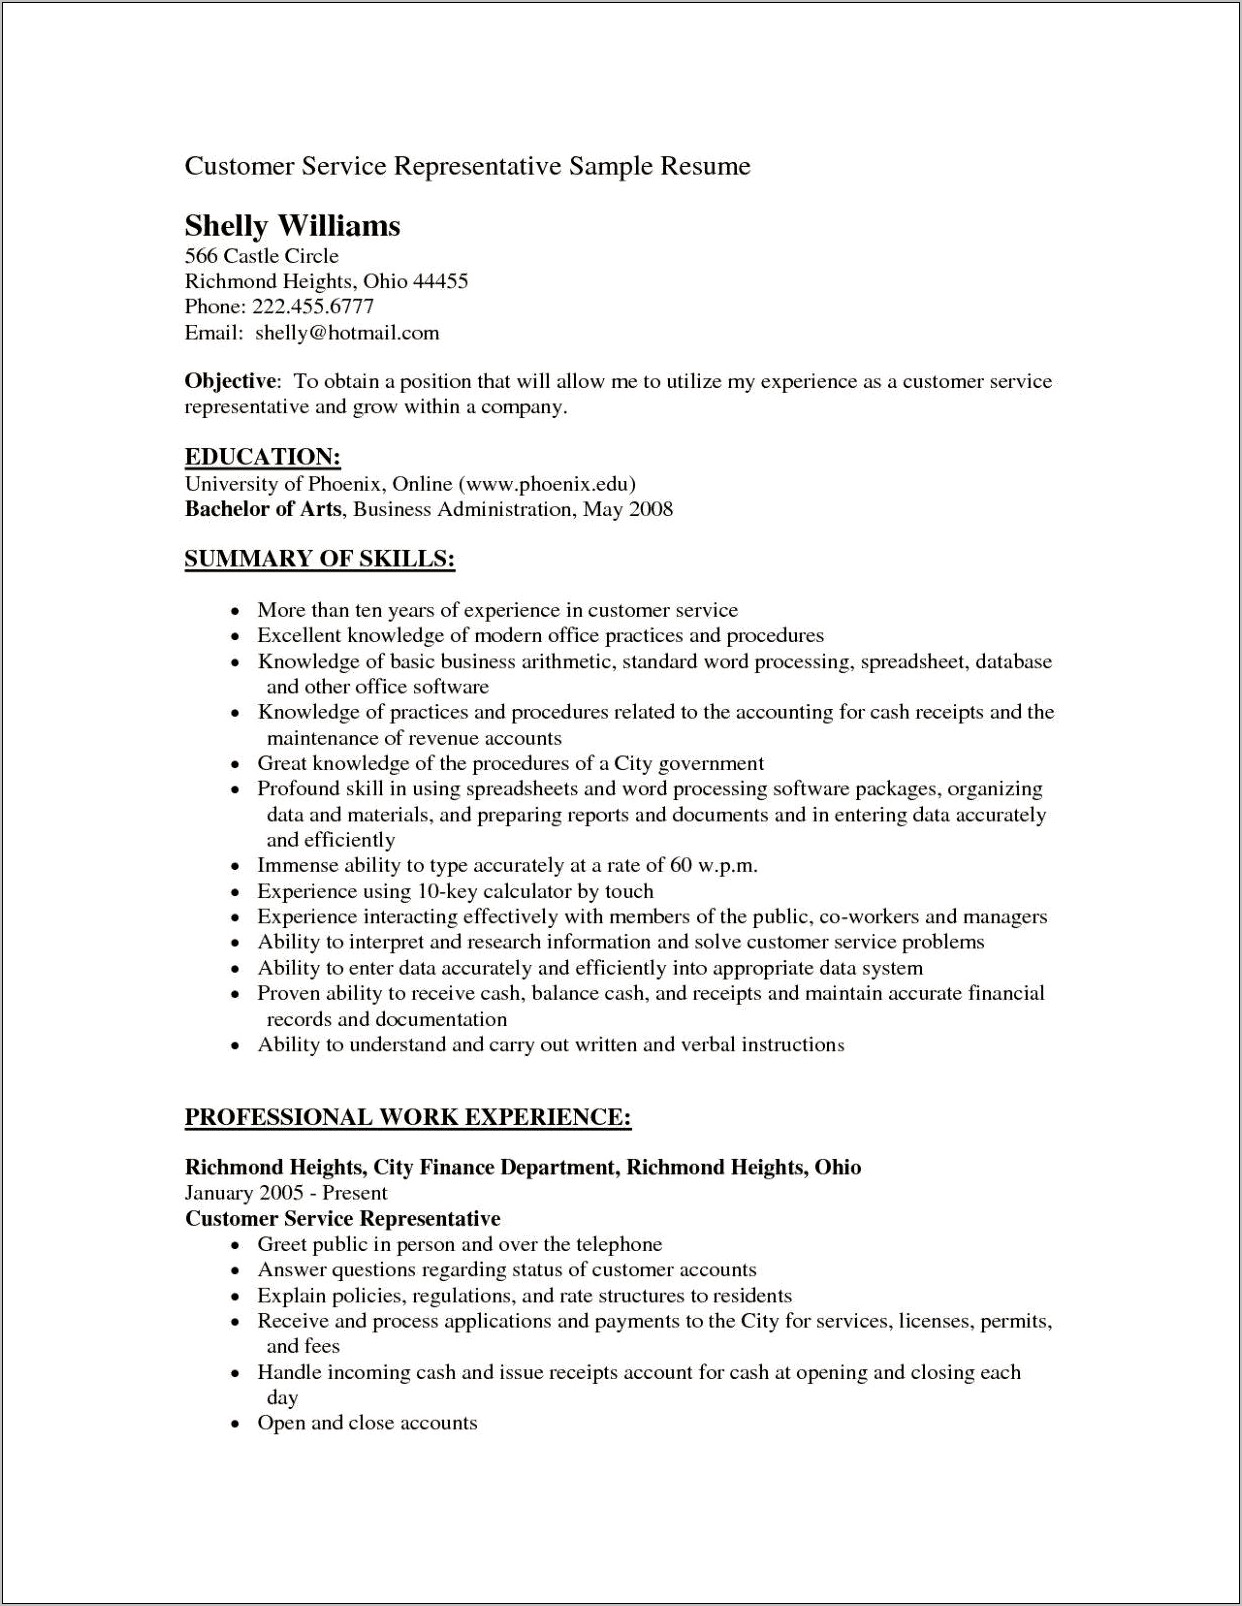 General Resume Objective Examples For Customer Service